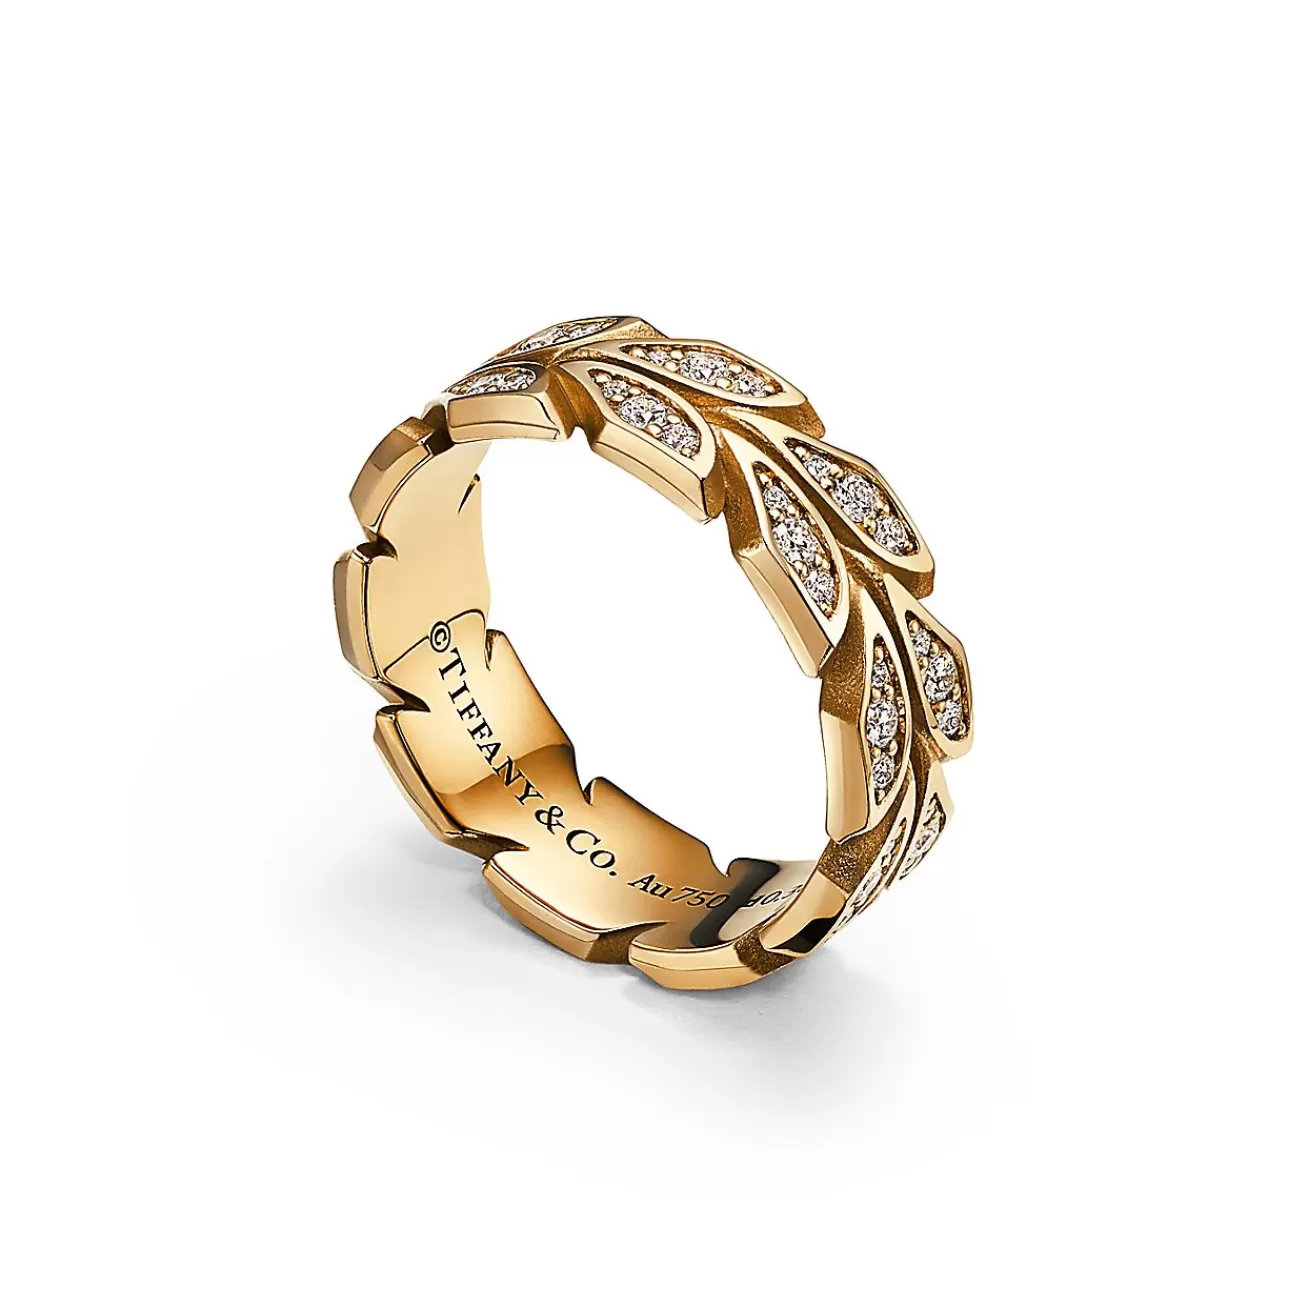 Tiffany & Co. Tiffany Victoria® Vine Band Ring in Yellow Gold with Diamonds, 6 mm Wide | ^ Rings | Gold Jewelry